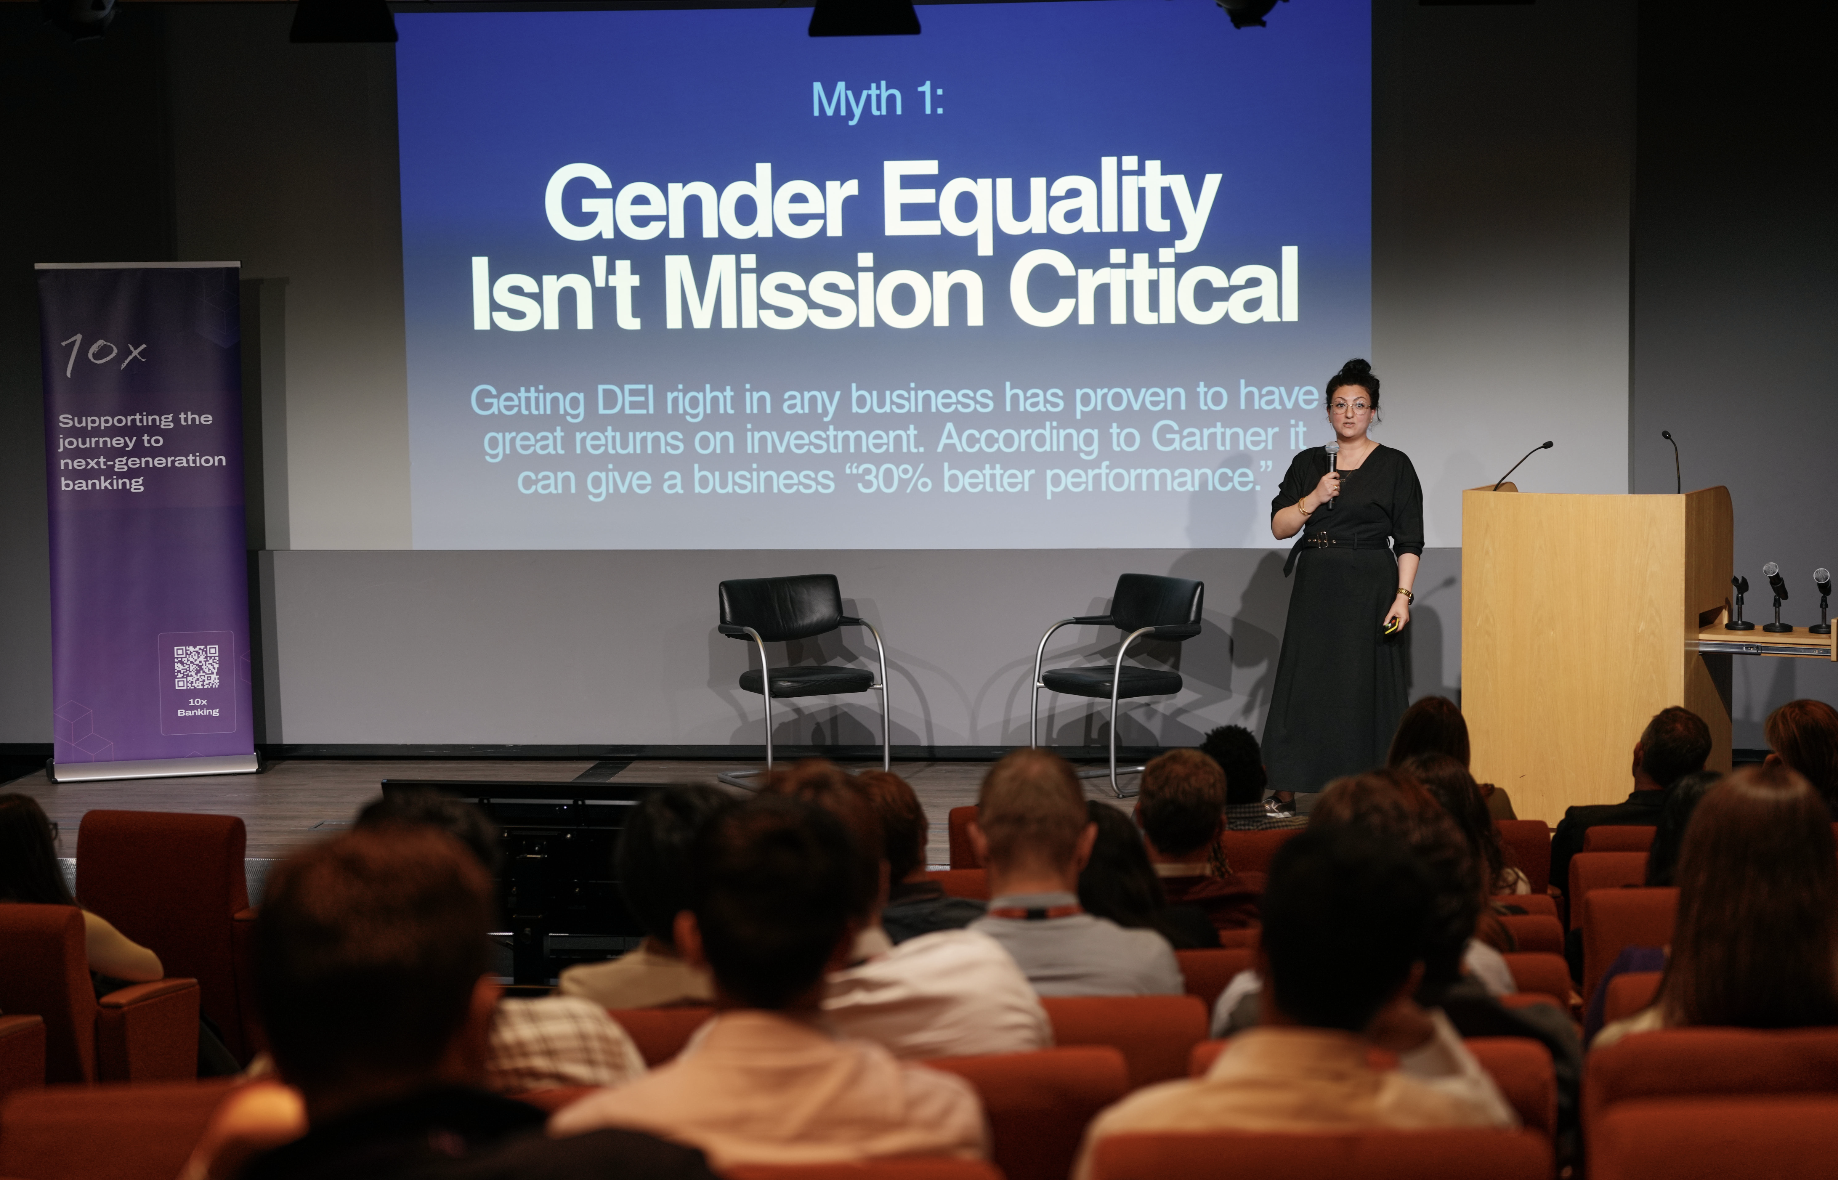 Nadia stands on stage in front of a slide that reads Myth 1: Gender Equality Isn't Mission Critical